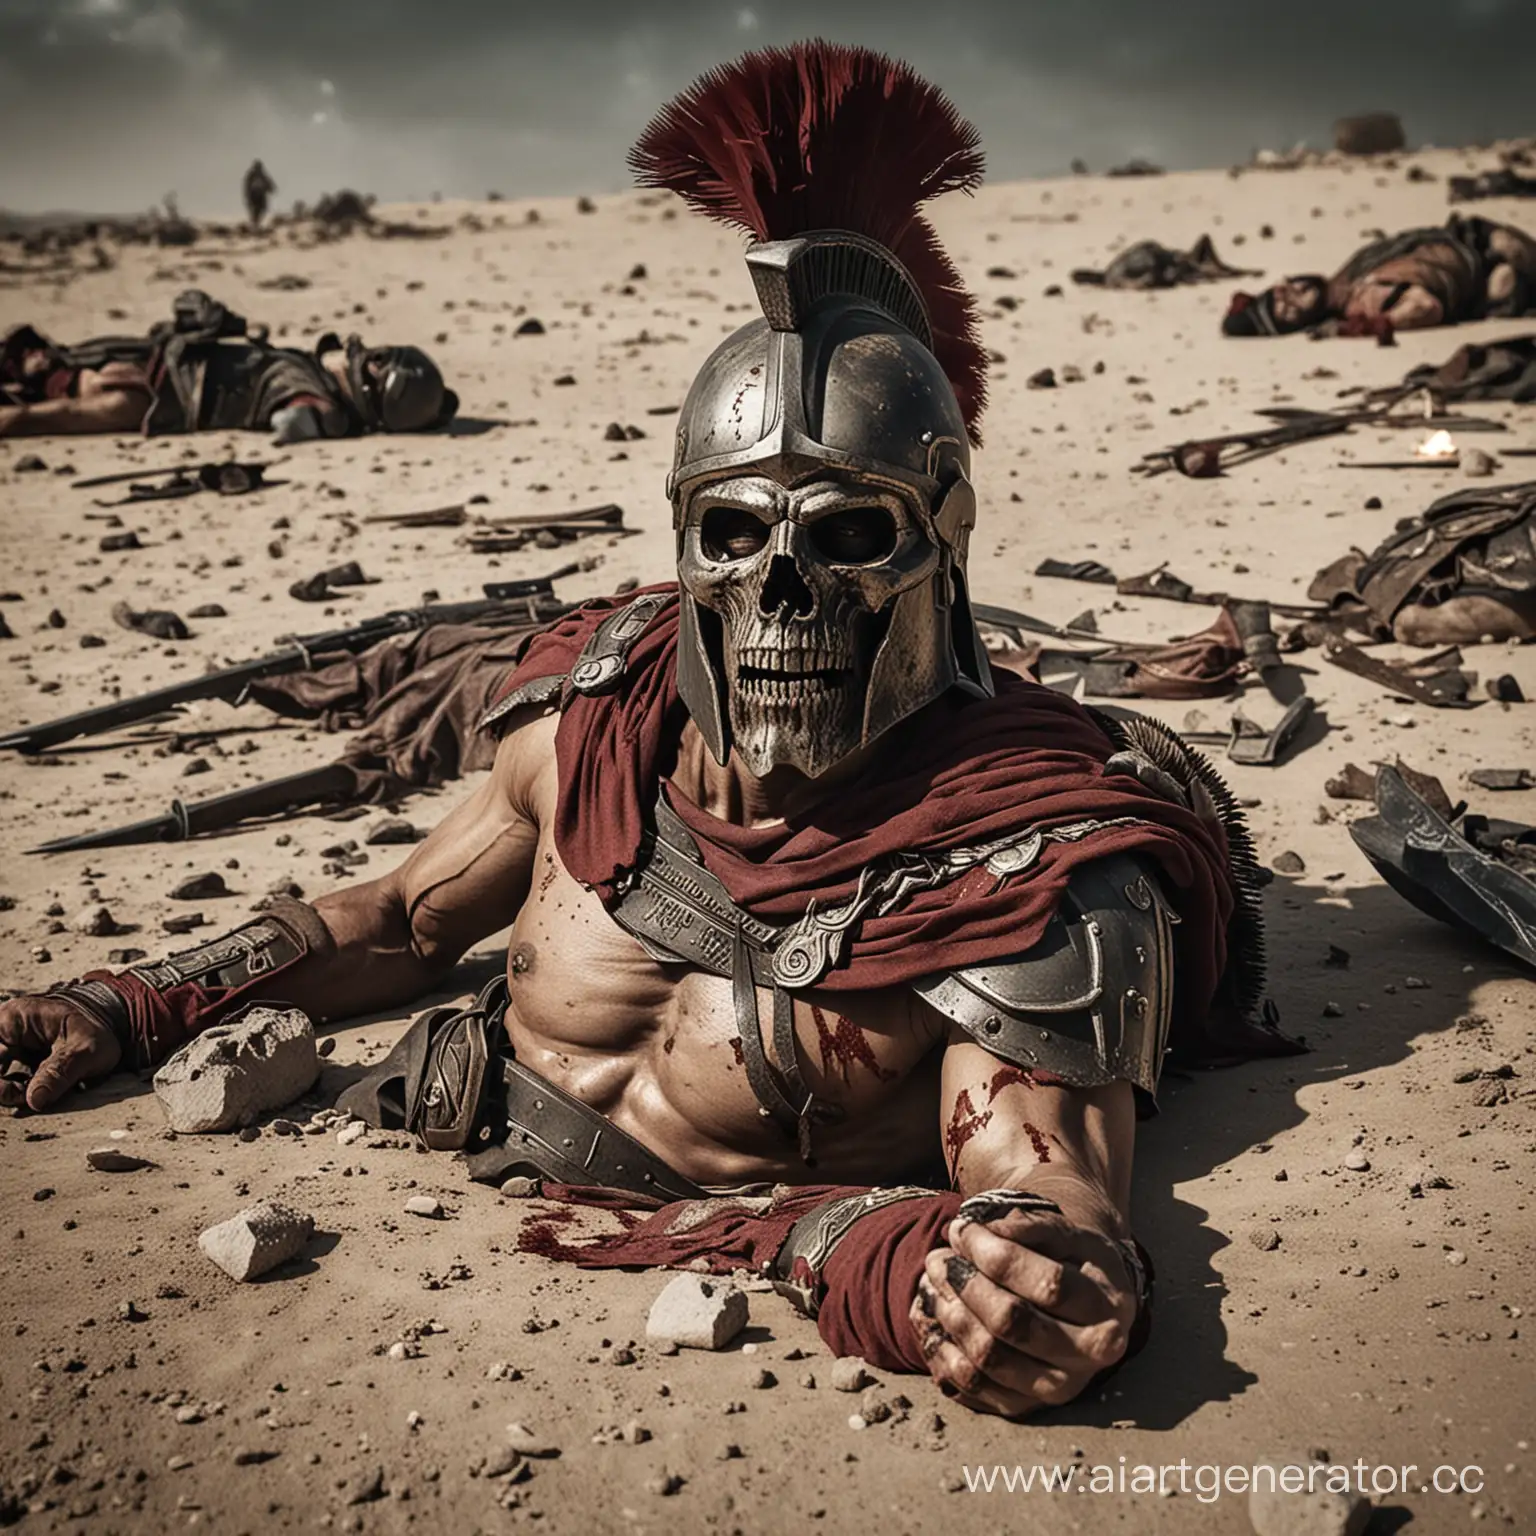 Remains-of-a-Spartan-General-in-Battle